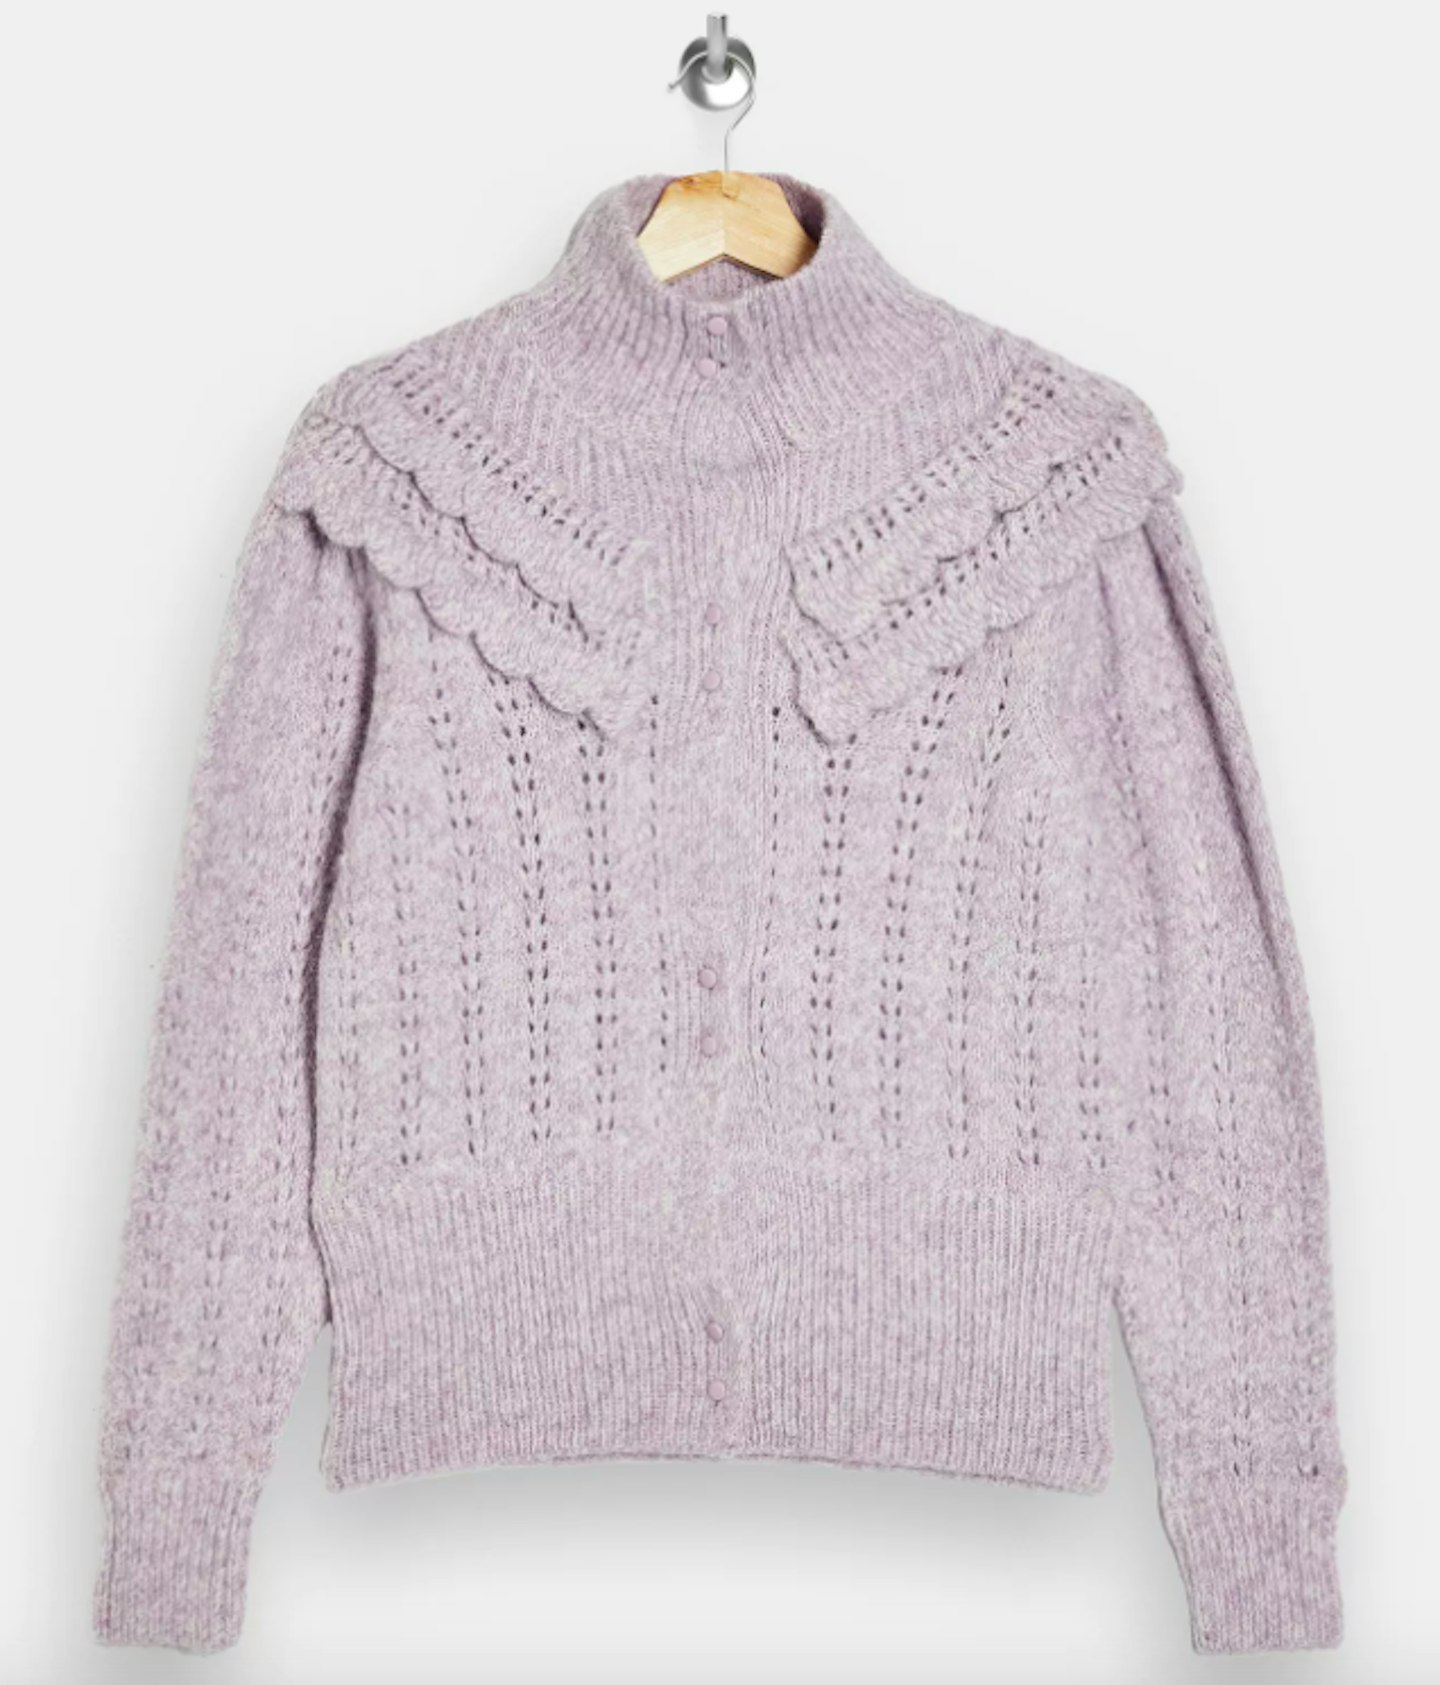 Topshop, Lilac Frill Pointelle Knitted Cardigan, WAS £35.99, NOW £26.99